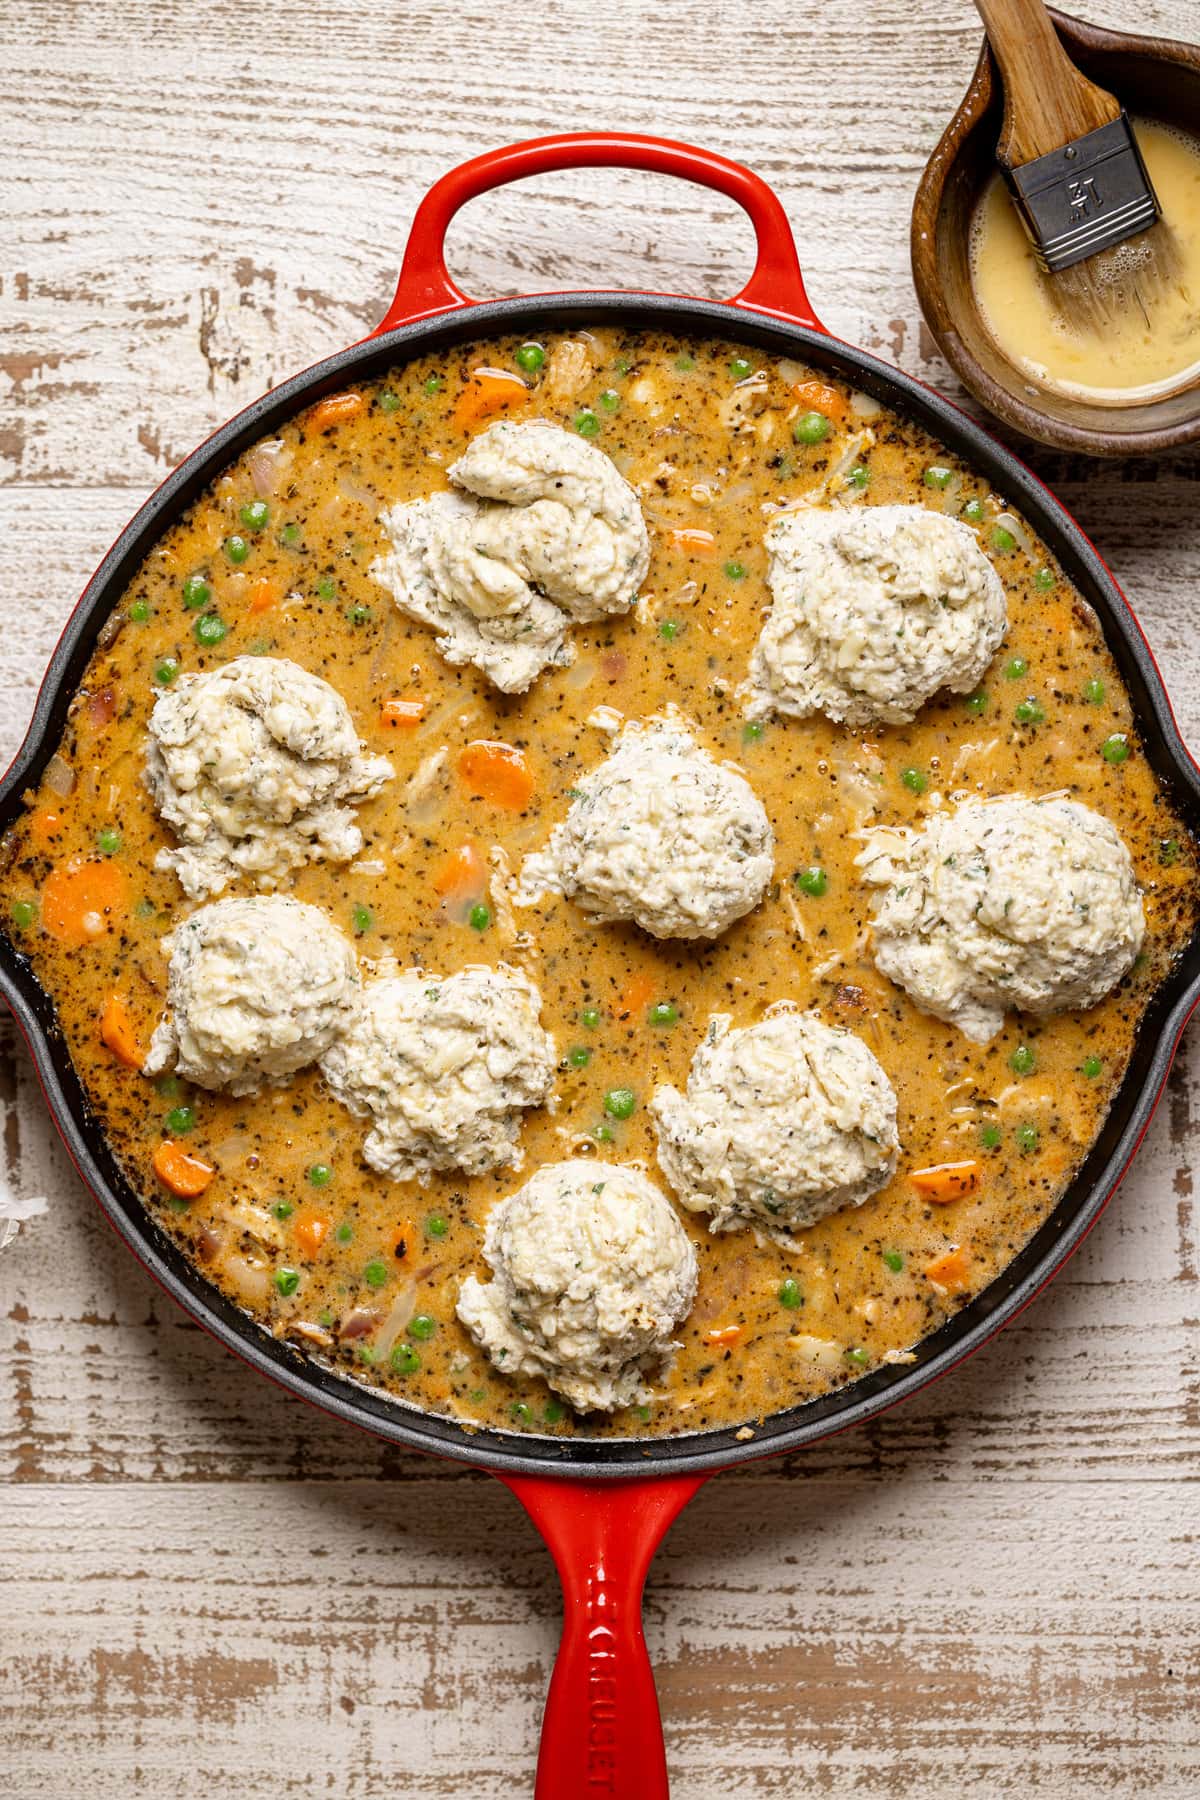 Skillet of Pie topped with dollops of Cheddar Herb Biscuit dough. The perfect weeknight dinner option.